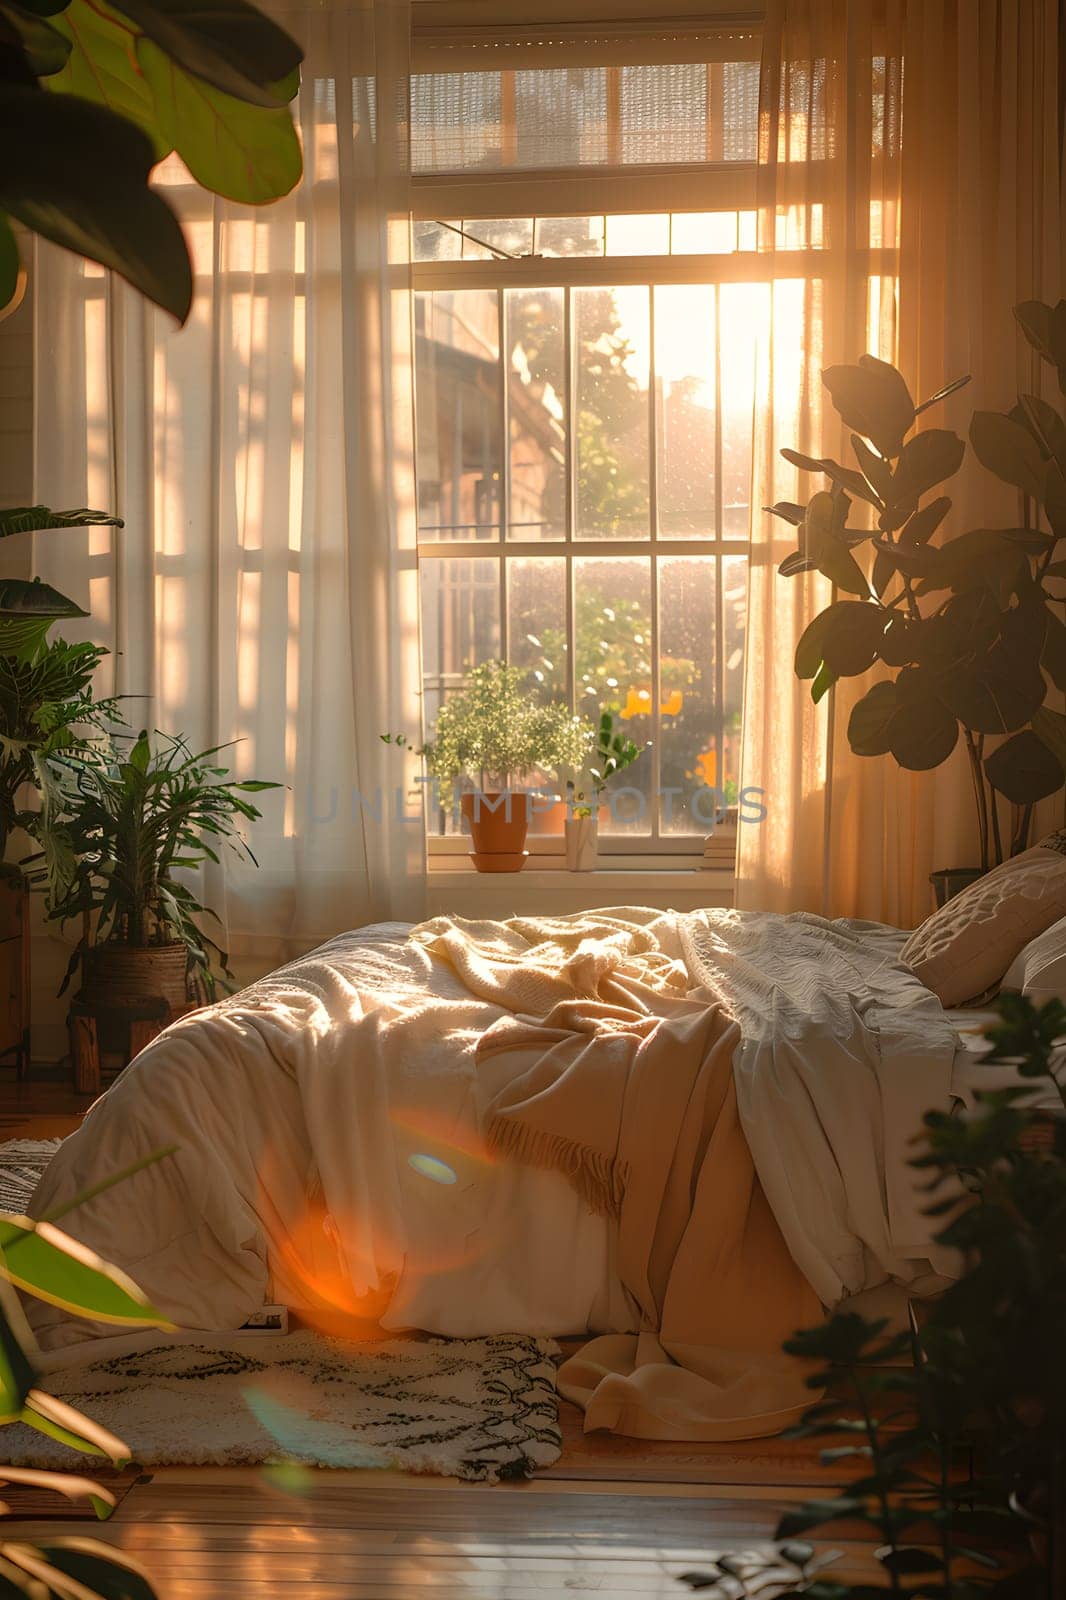 A bedroom with plants, a bed, and sunlight filtering through the window curtains by Nadtochiy